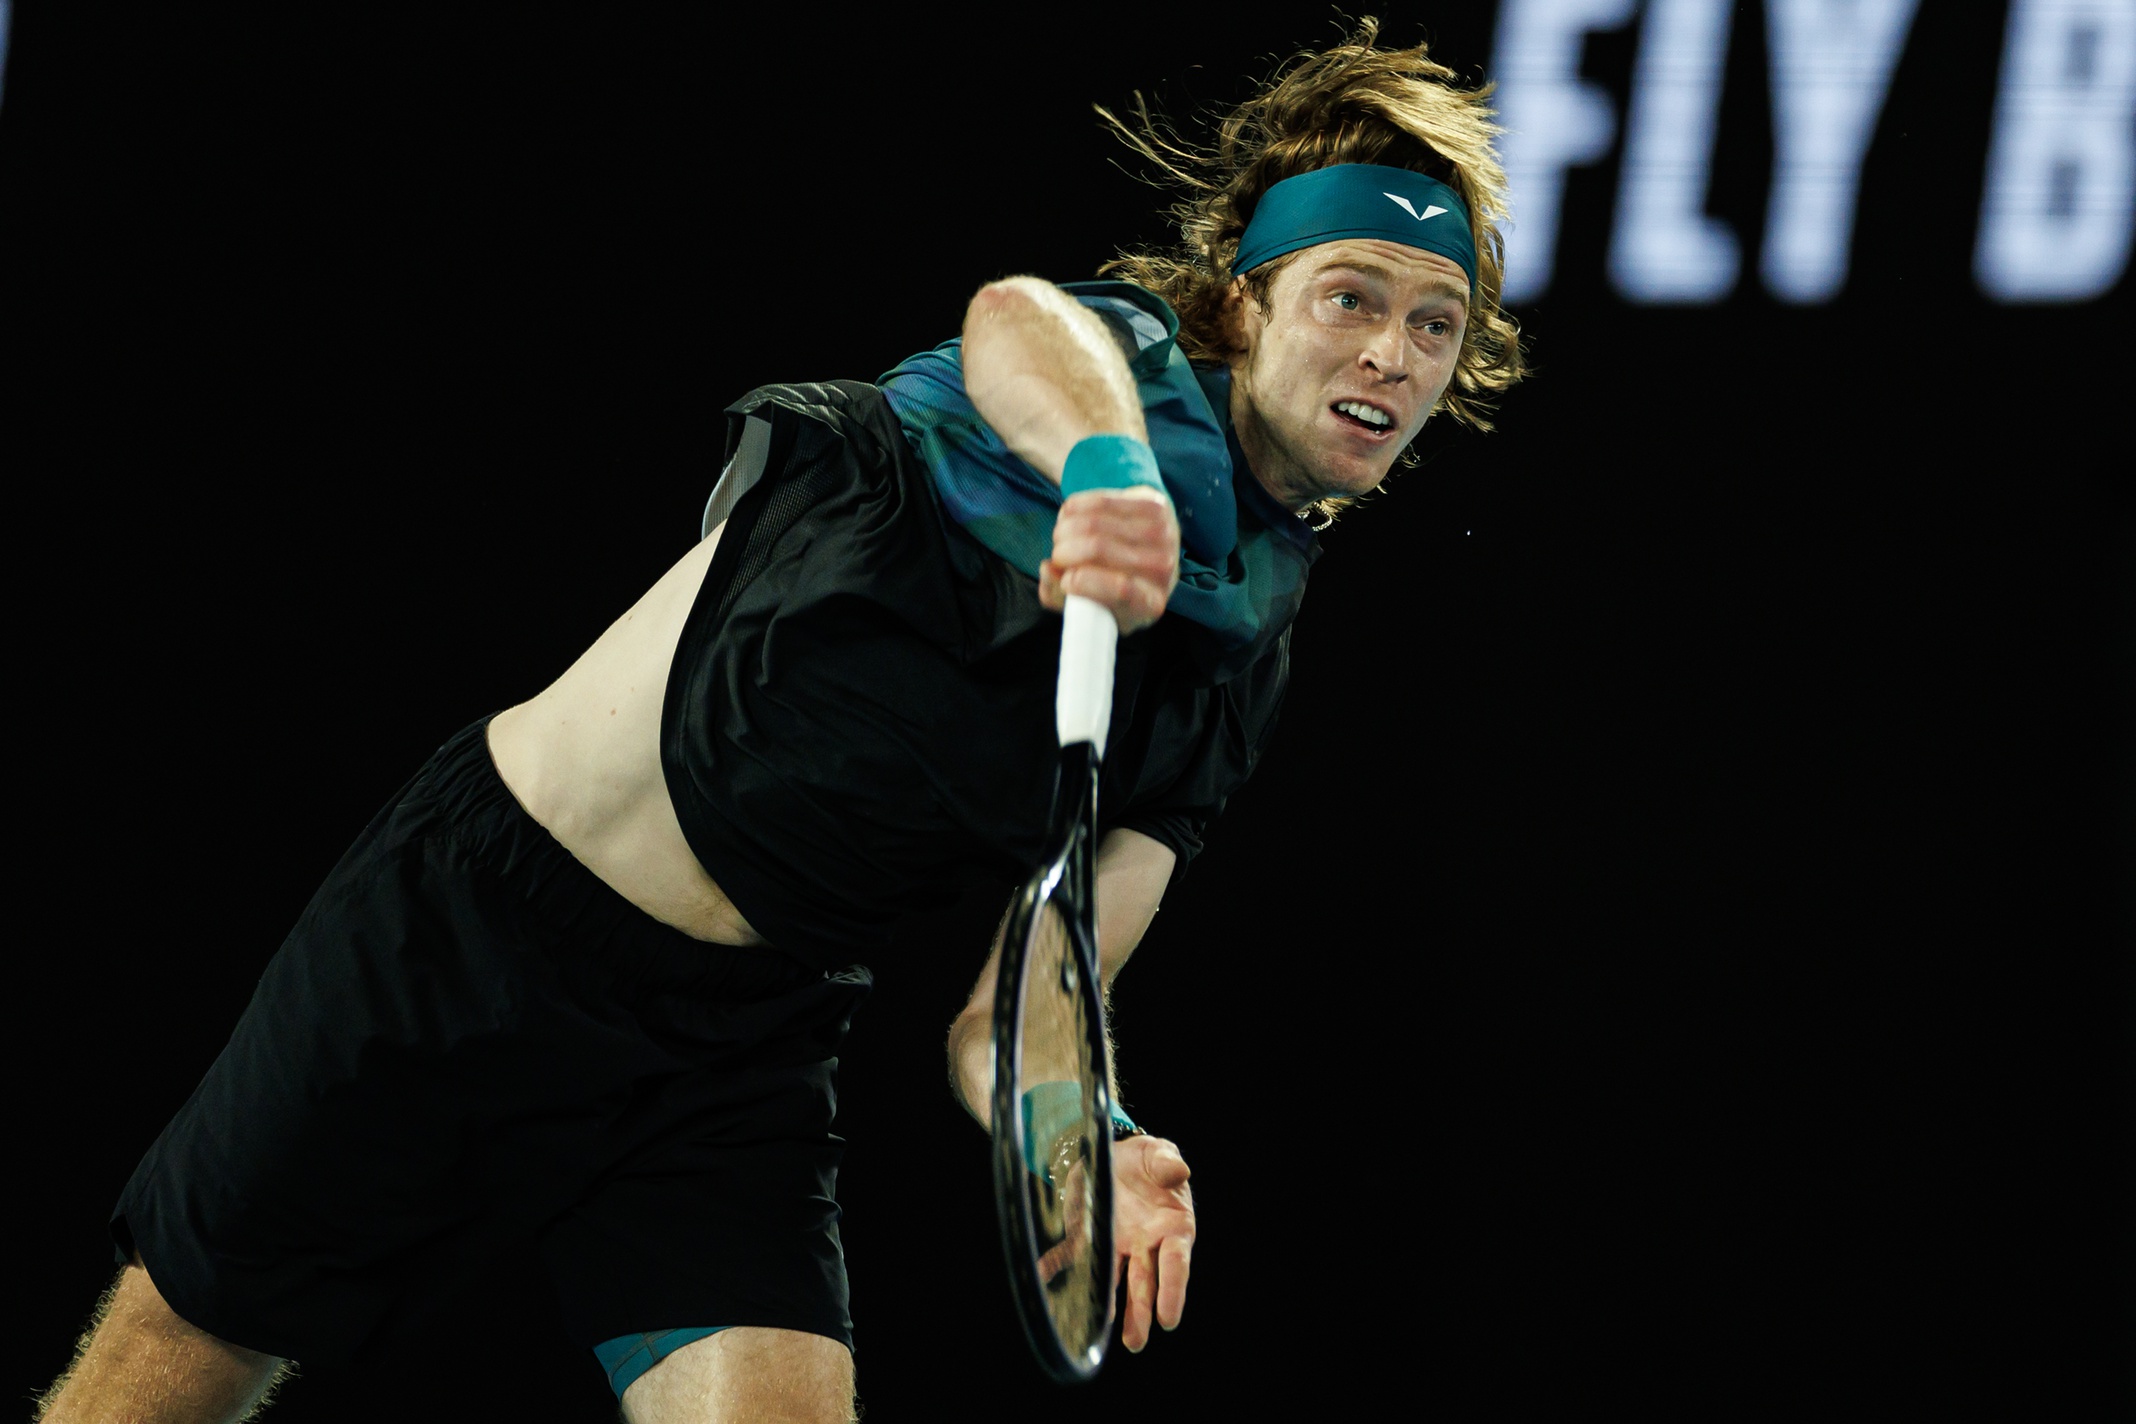 Andrey Rublev in action ahead of the ATP Dubai Tennis Championships.